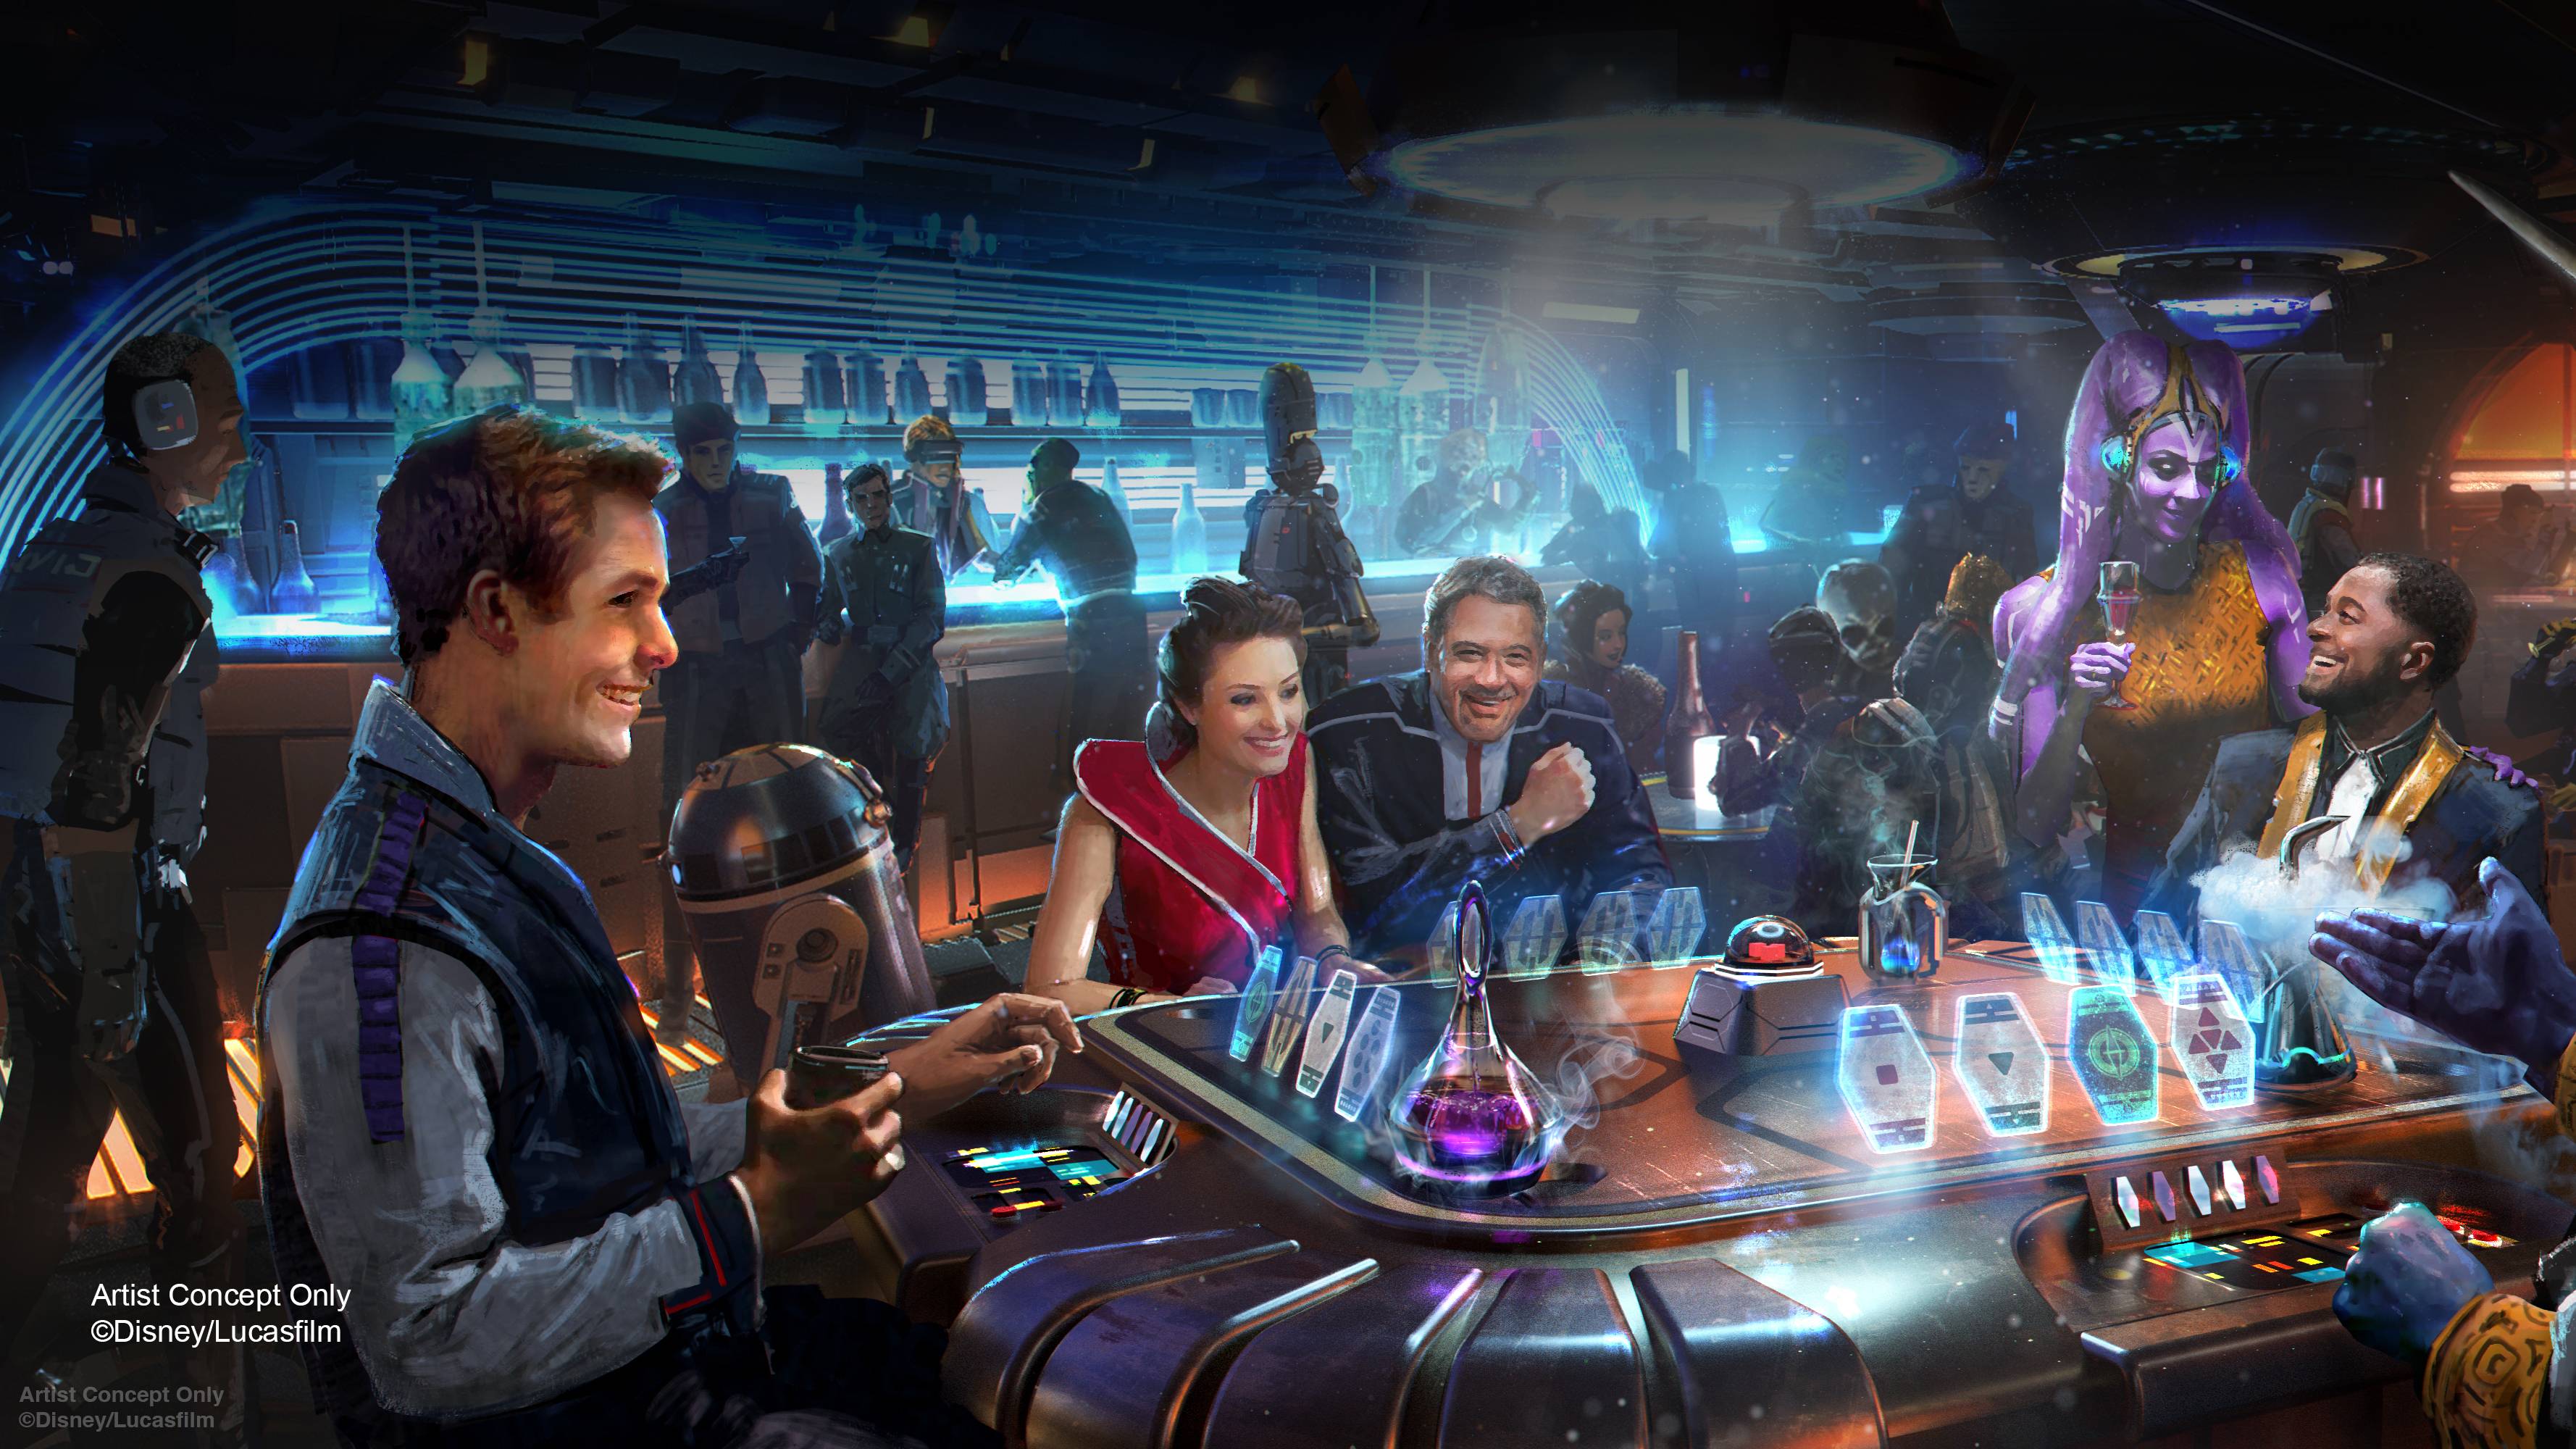 Star Wars Galactic Starcruiser - The Sublight Lounge